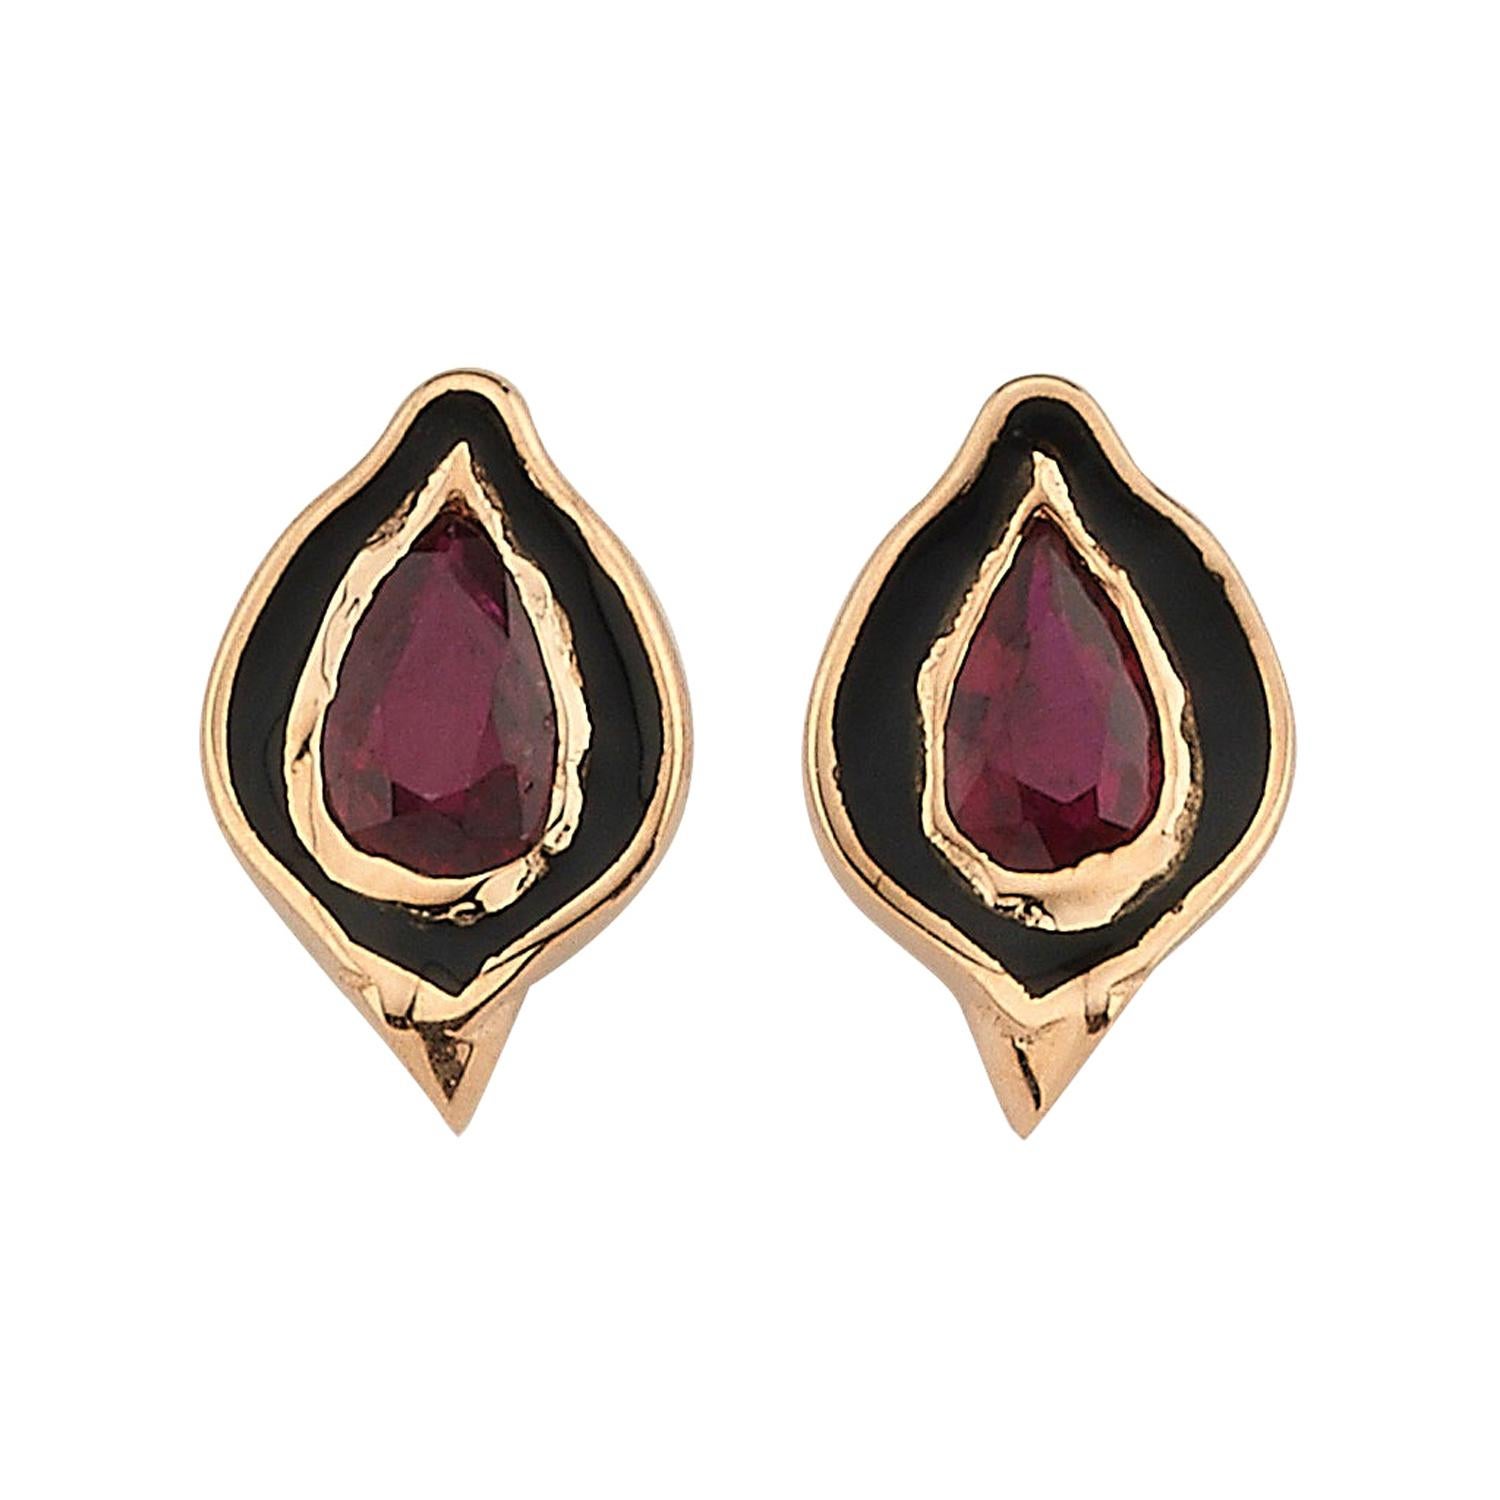 Baby Dragon Ruby Stud Earrings in 14 Karat Rose Gold with Ruby For Sale